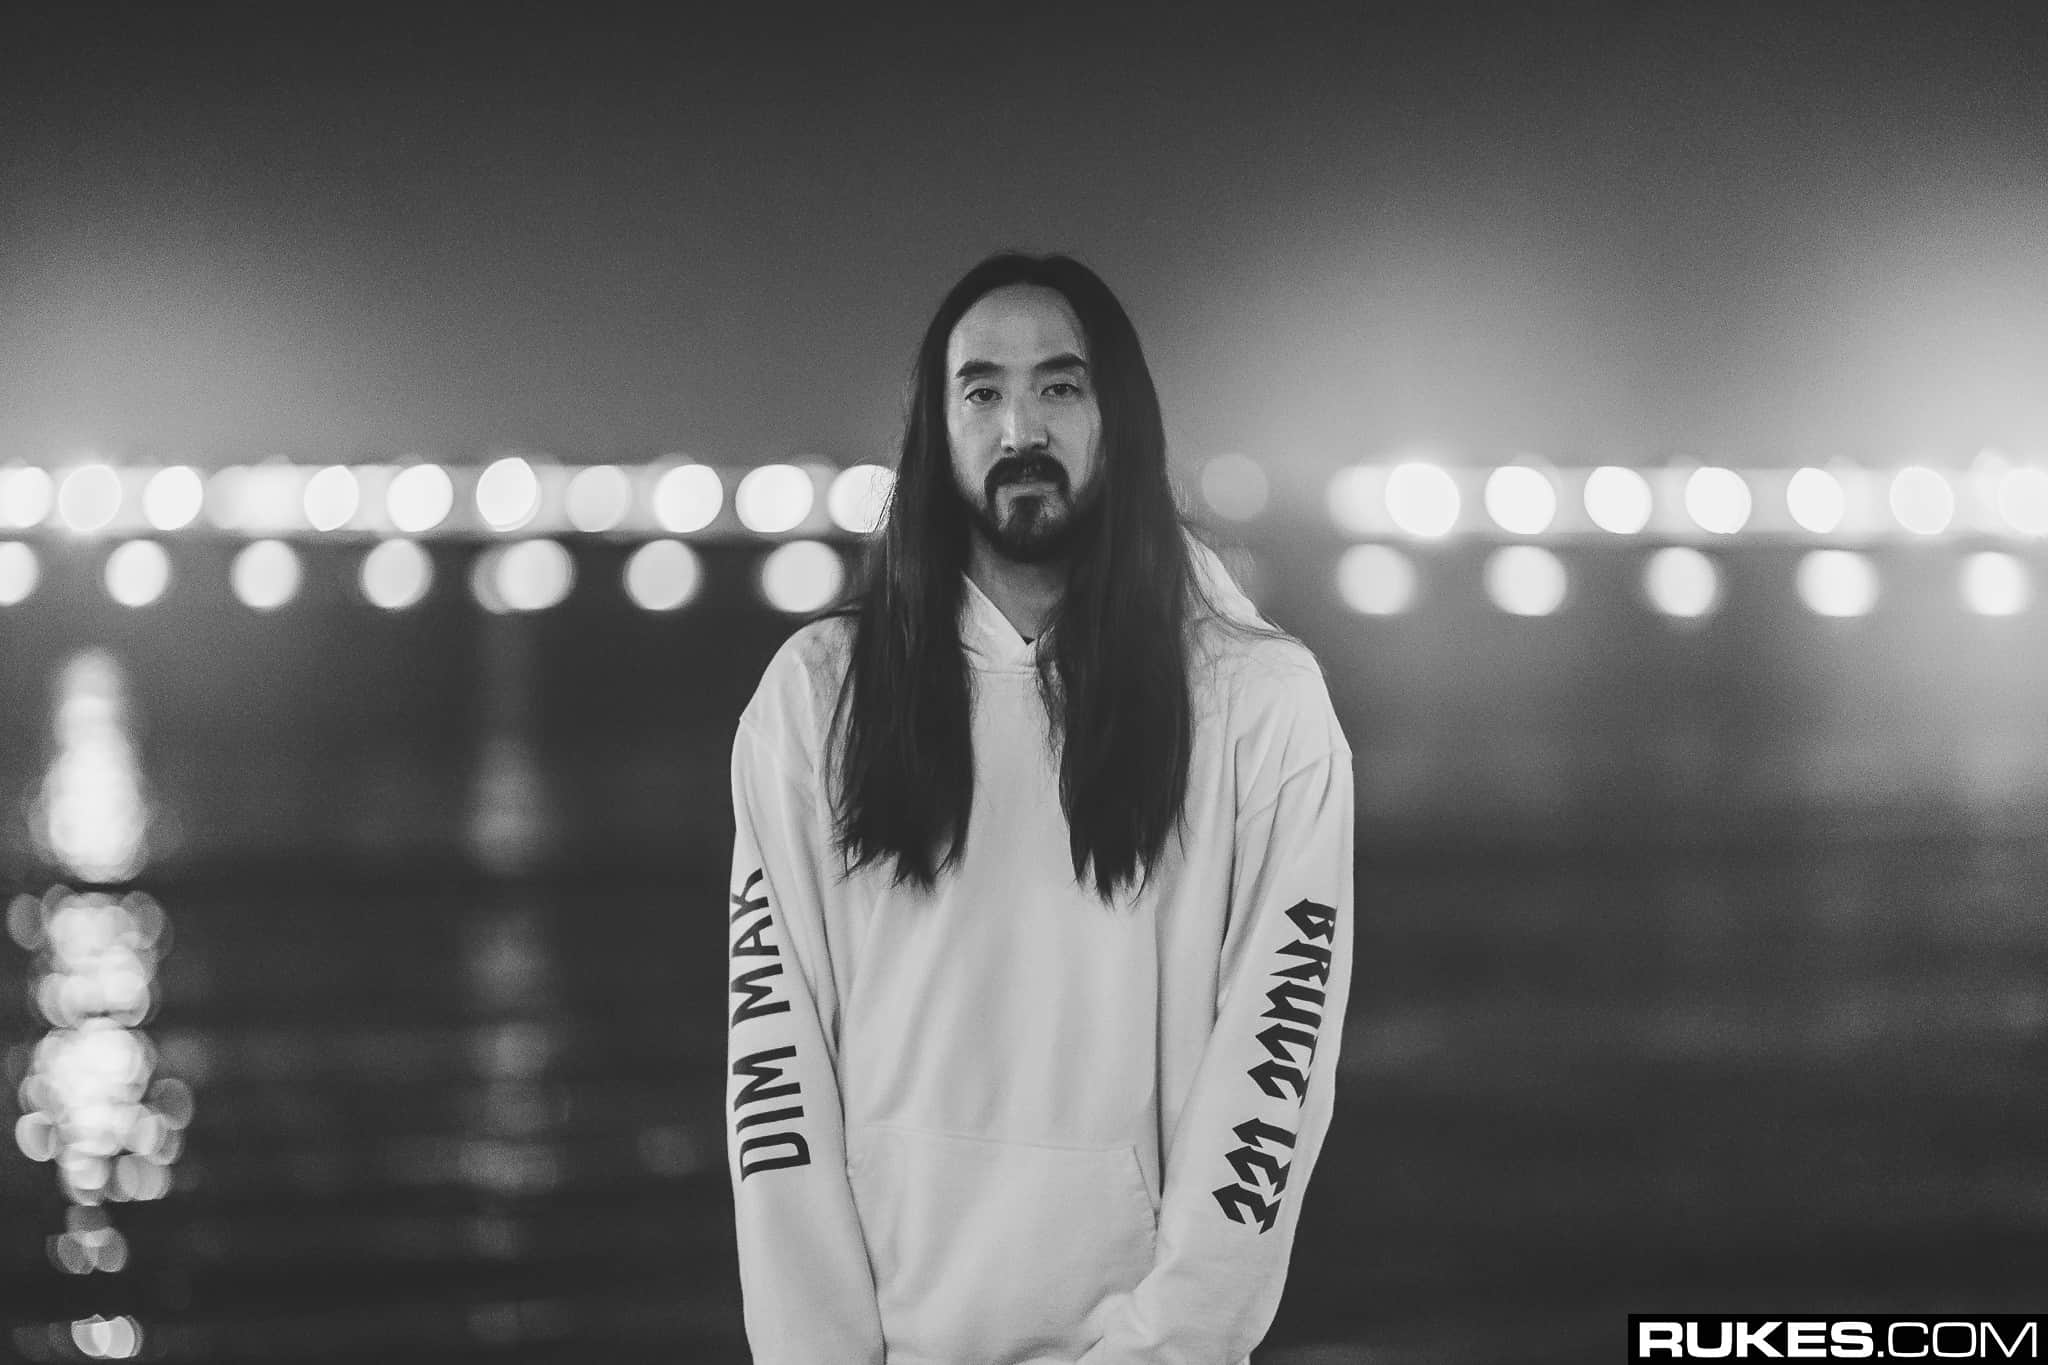 Steve Aoki set to sell NFT art collection